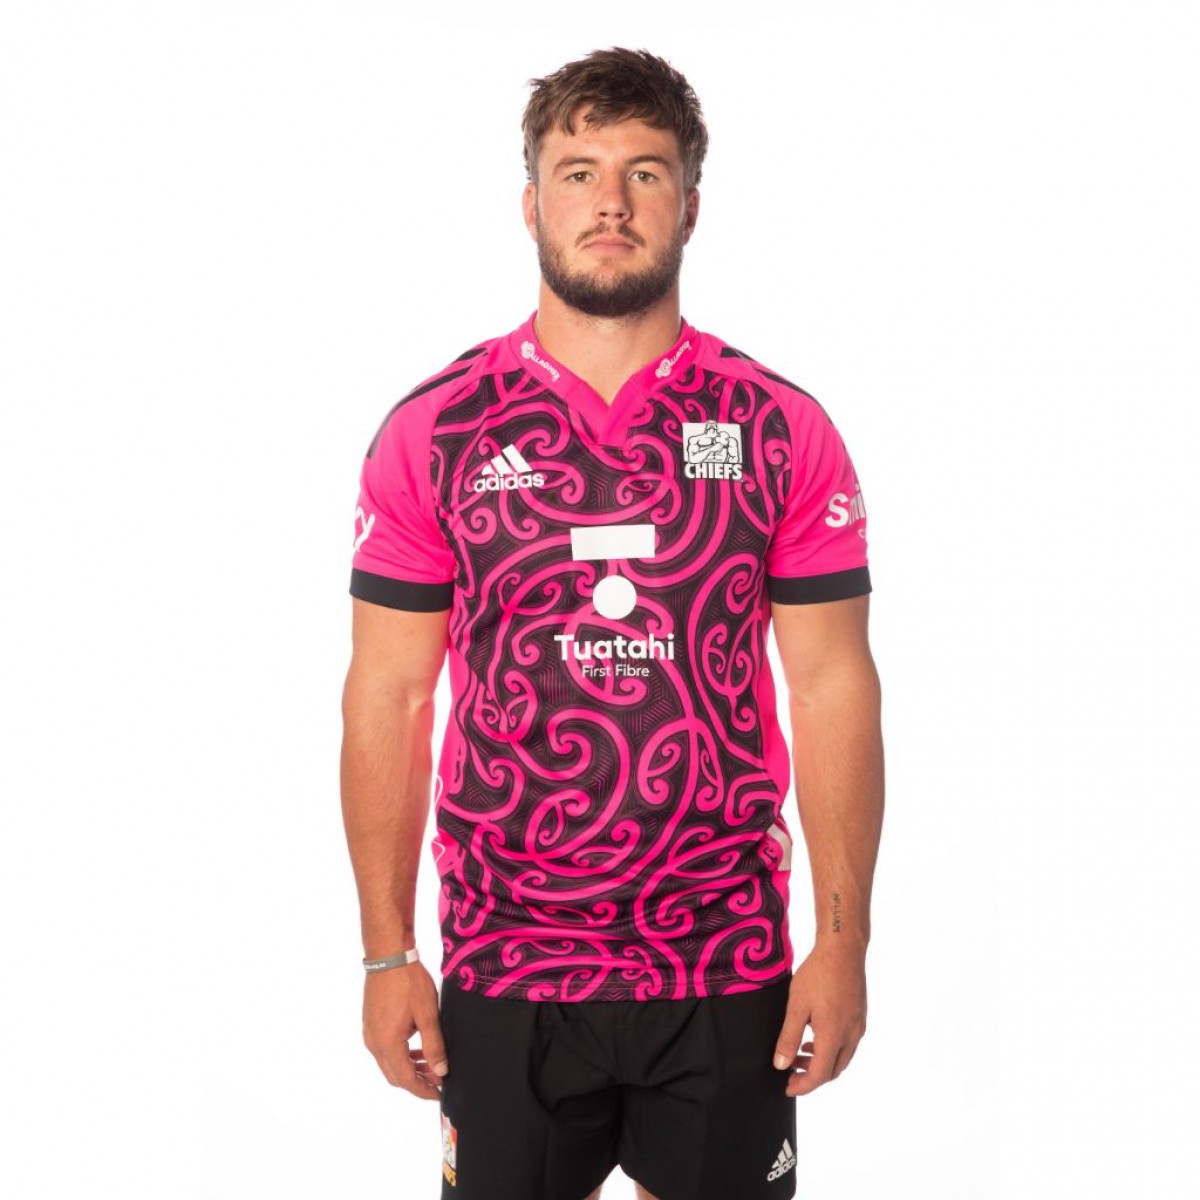 The Chiefs 2020 training rugby jersey shirt S-3XL 